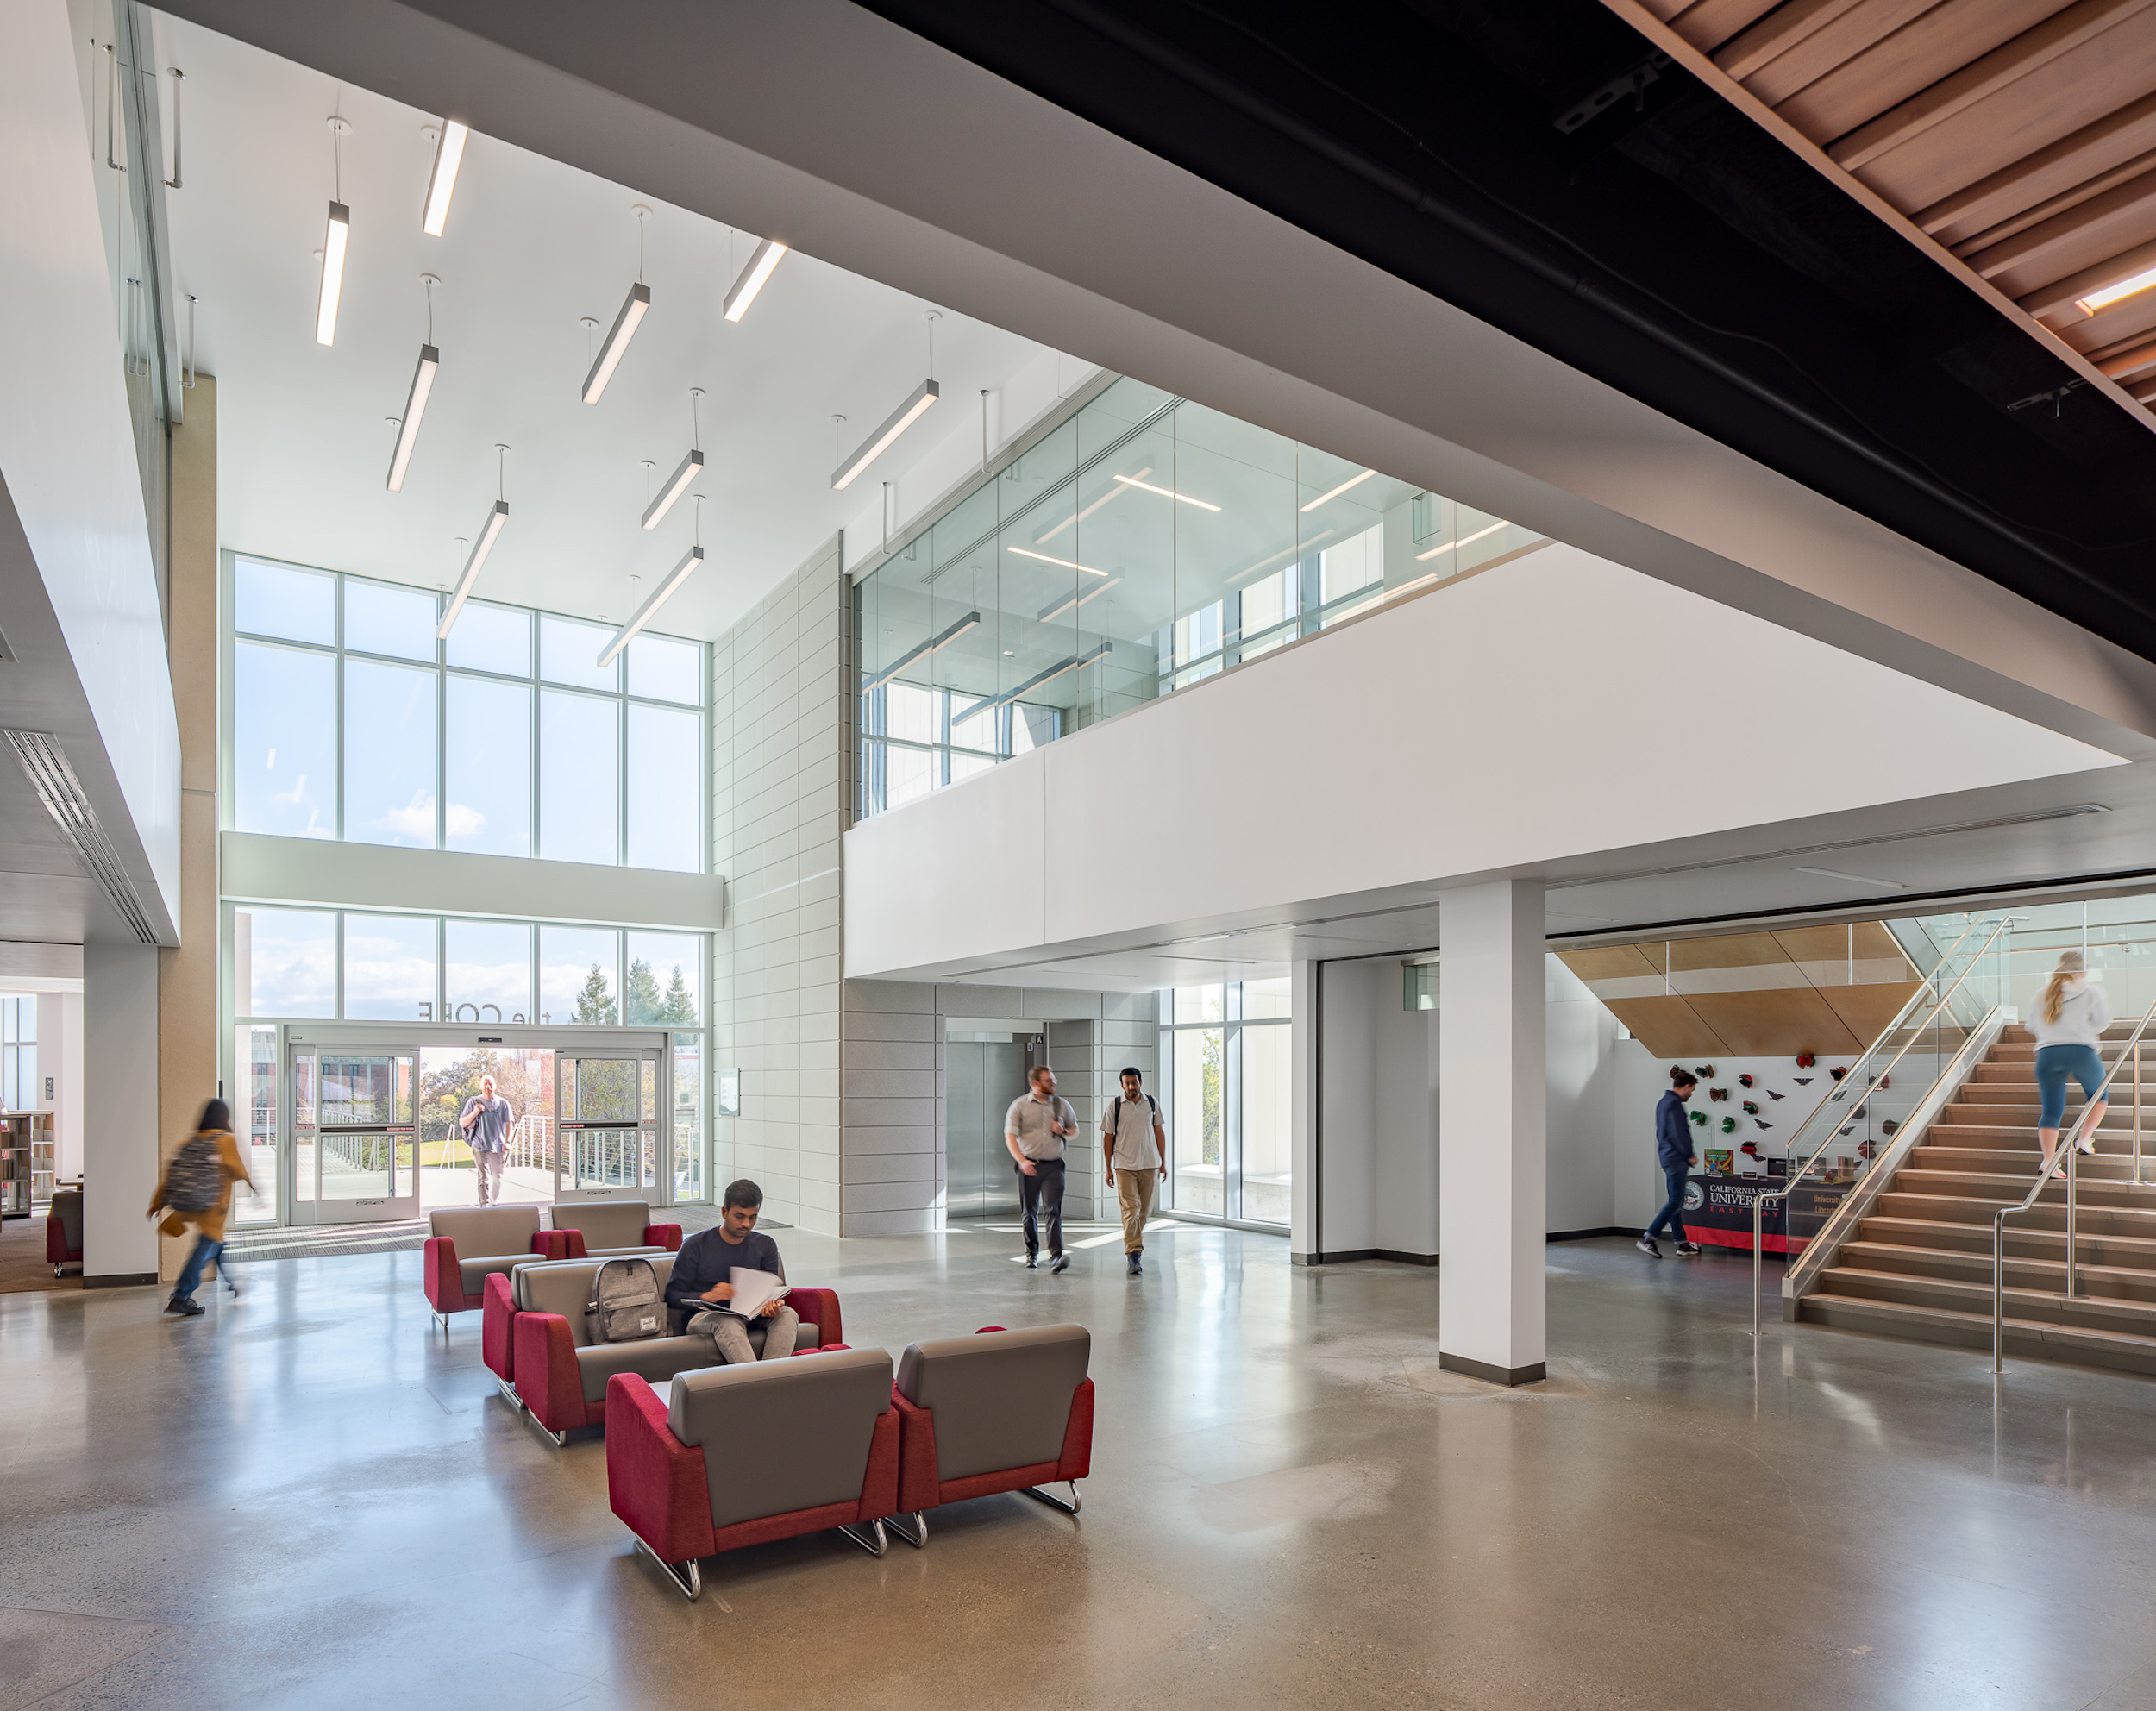 California State University, East Bay's Collaborative Opportunities for Research & Engagement (“CORE”) Building bridges upper and lower campuses Photos courtesy Anderson Brulé Architects